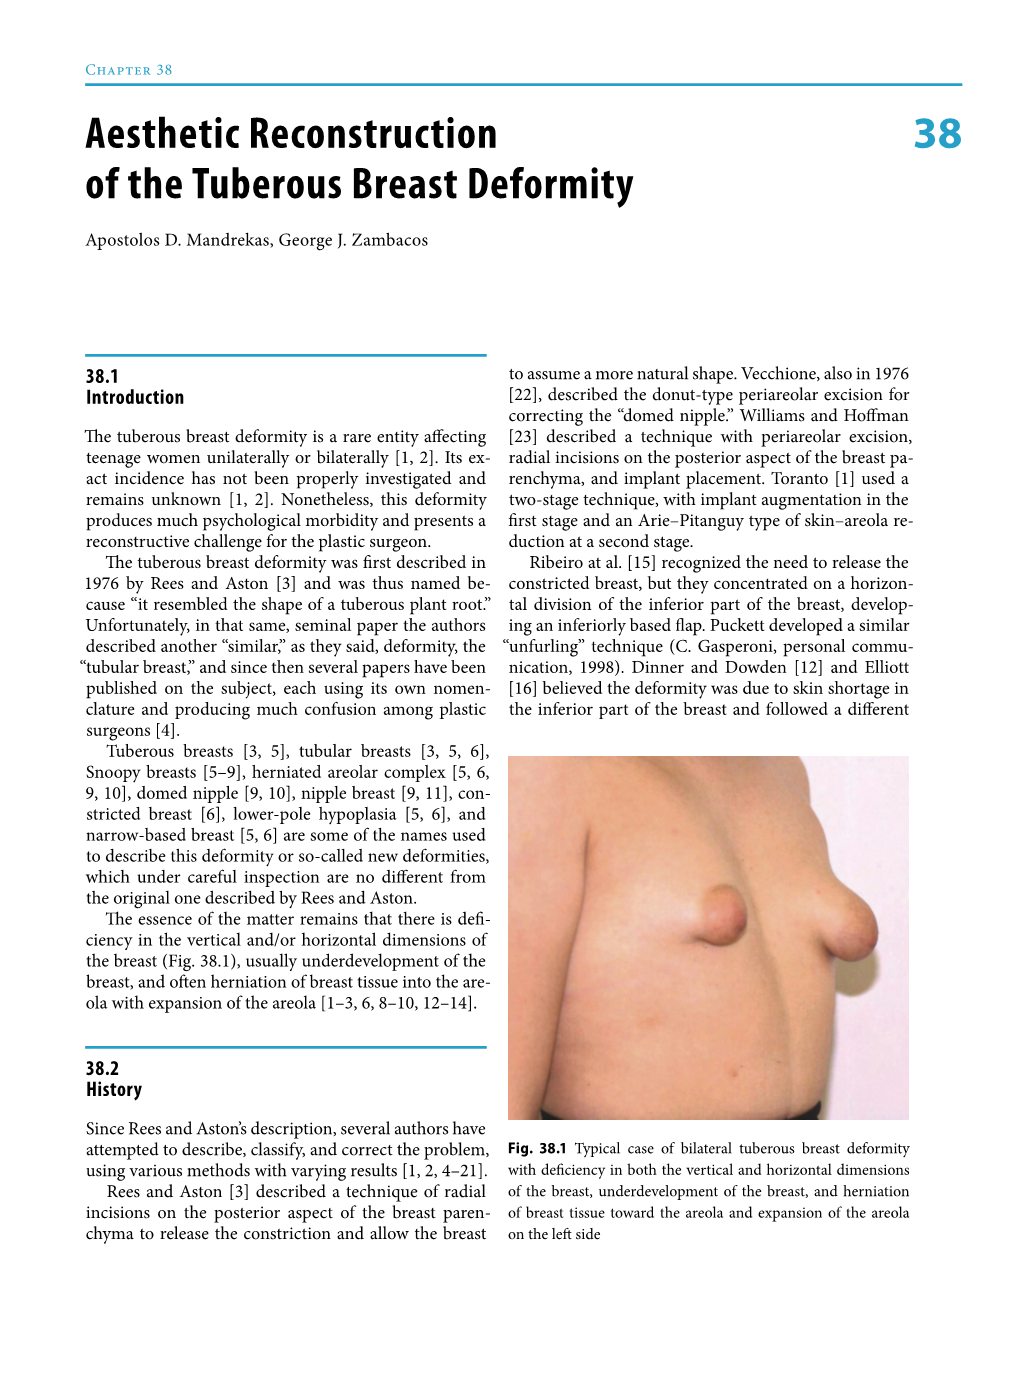 38 Aesthetic Reconstruction of the Tuberous Breast Deformity